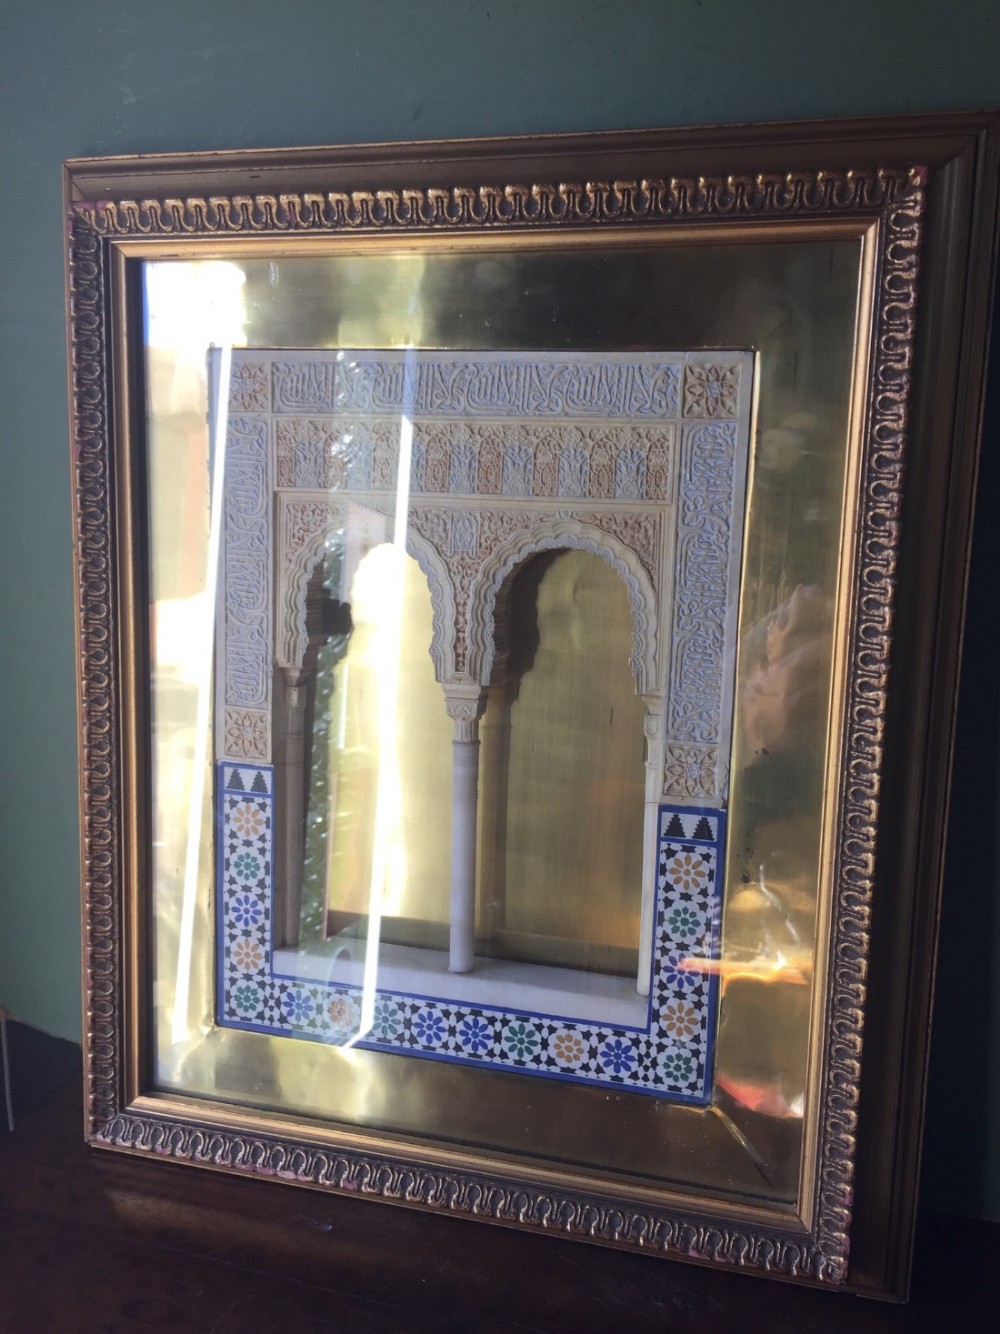 early c20th framed gesso or stucco polychrome decorated architectural plaque from alhambra